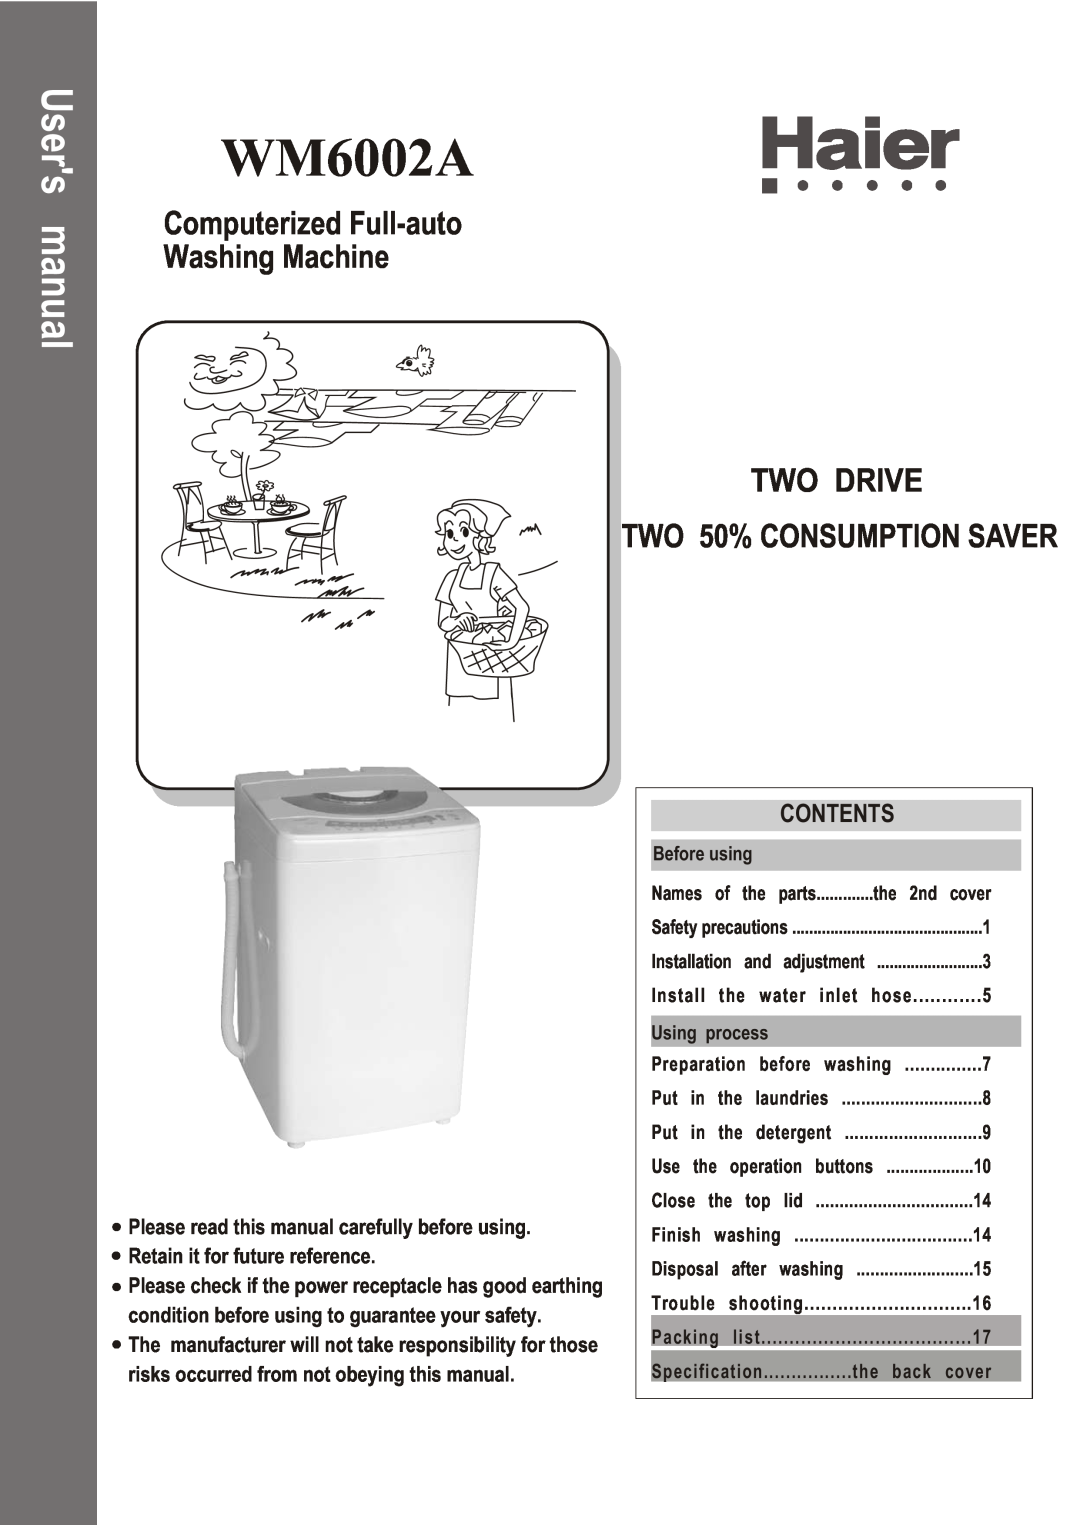 Haier WM6002A user manual Computerized Full-auto Washing Machine TWO DRIVE, TWO 50% CONSUMPTION SAVER, Contents 